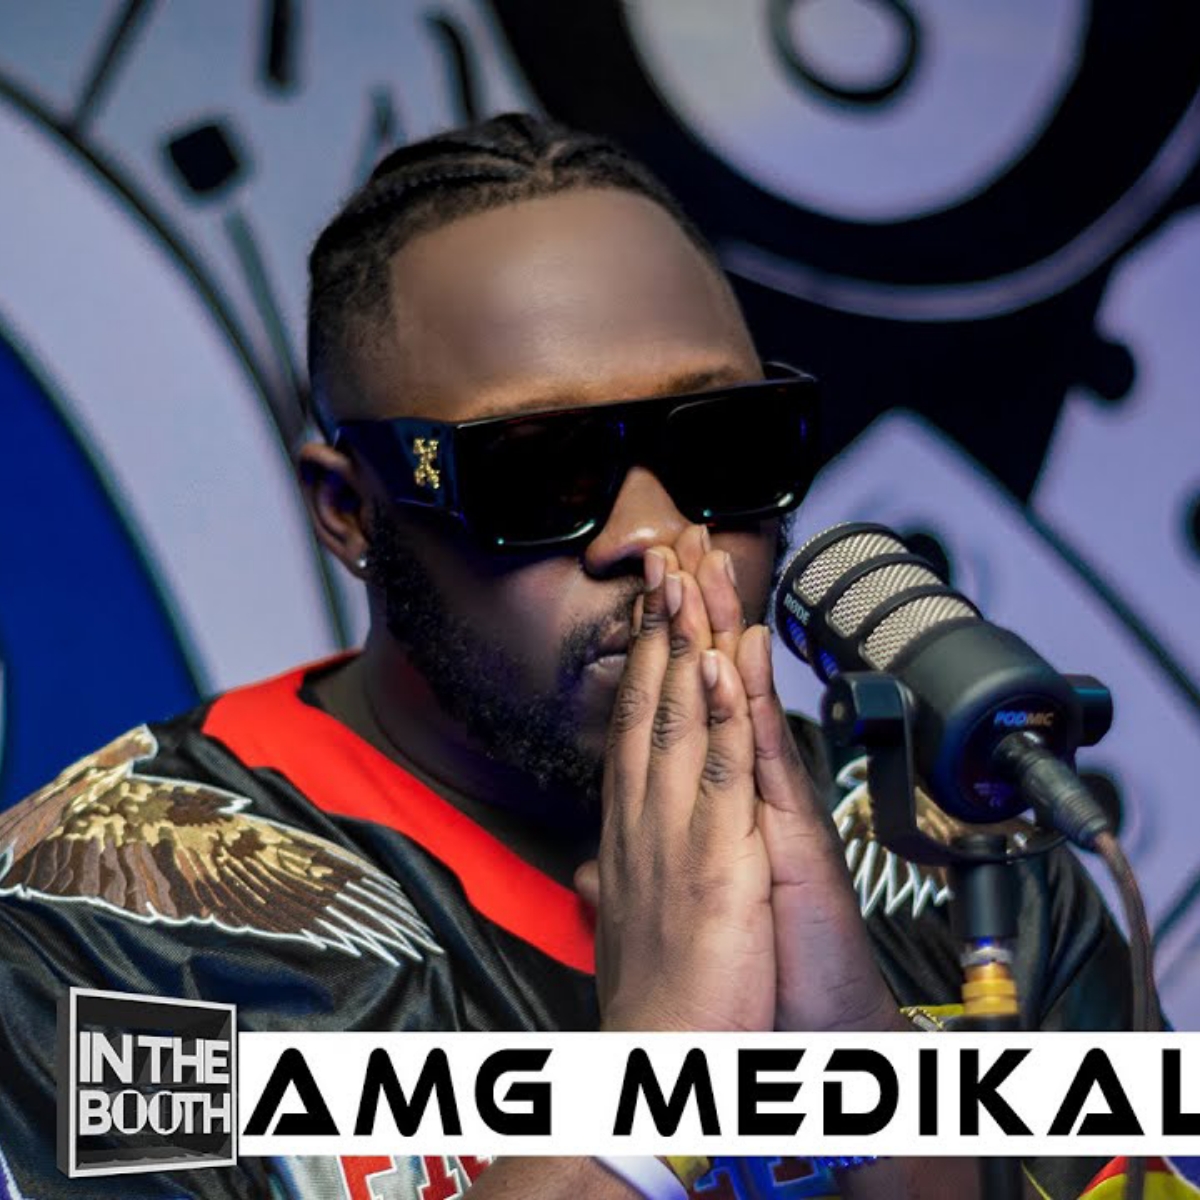 Medikal – In The Booth Freestyle mp3 download